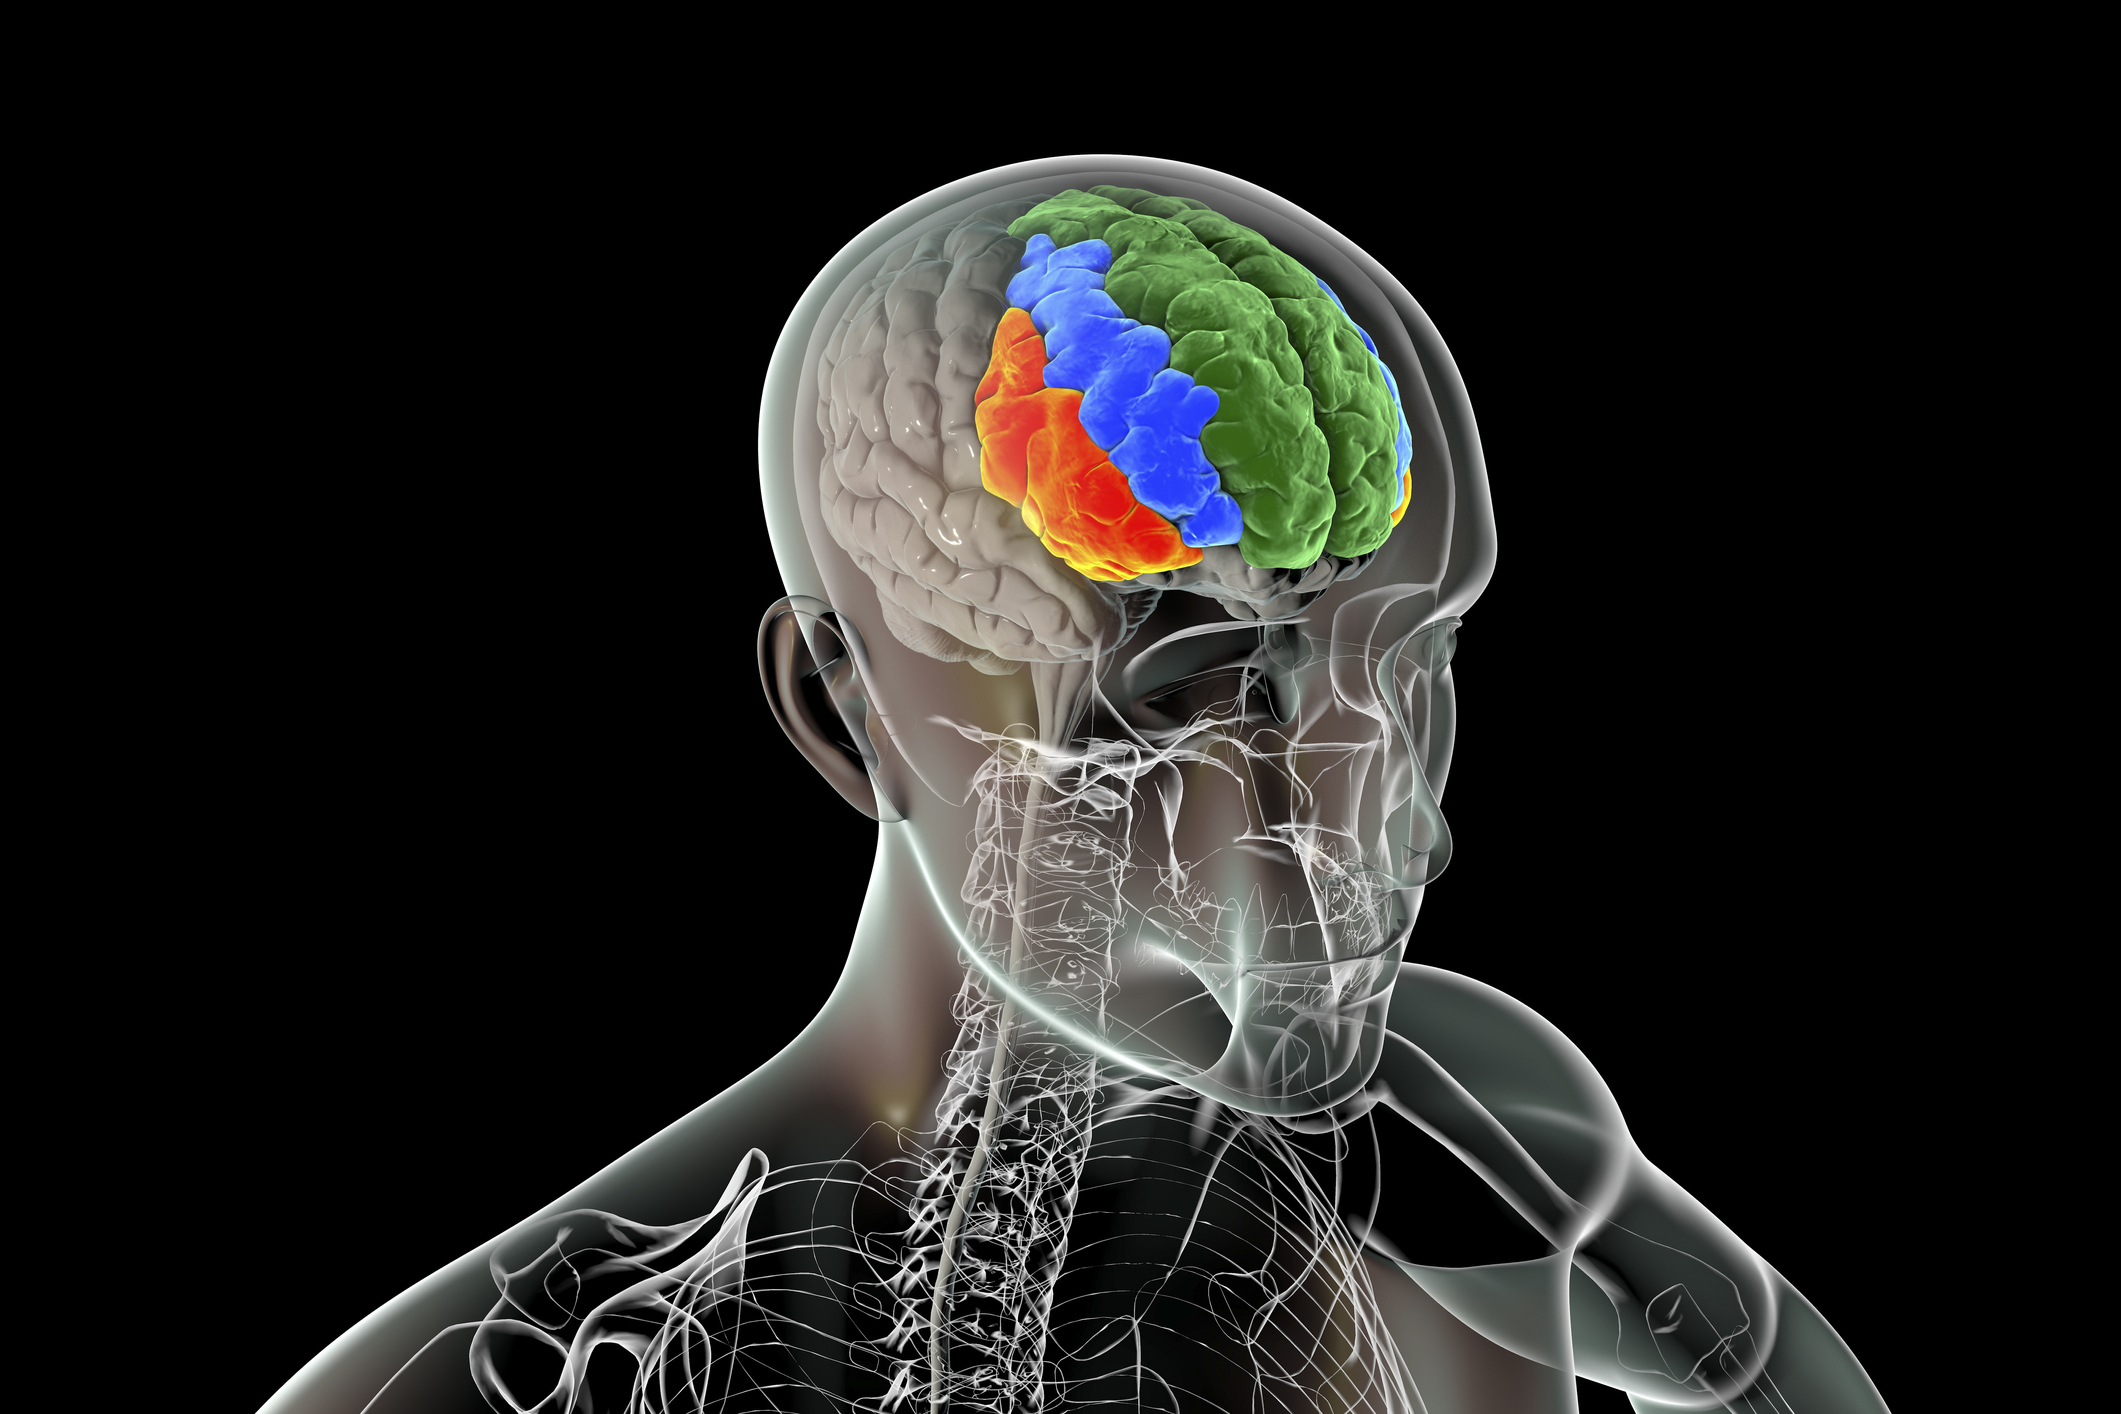 3d illustration of human brain in the body with the prefrontal cortex highlighted frontal gyri, superior (green), middle (blue), and inferior (orange)